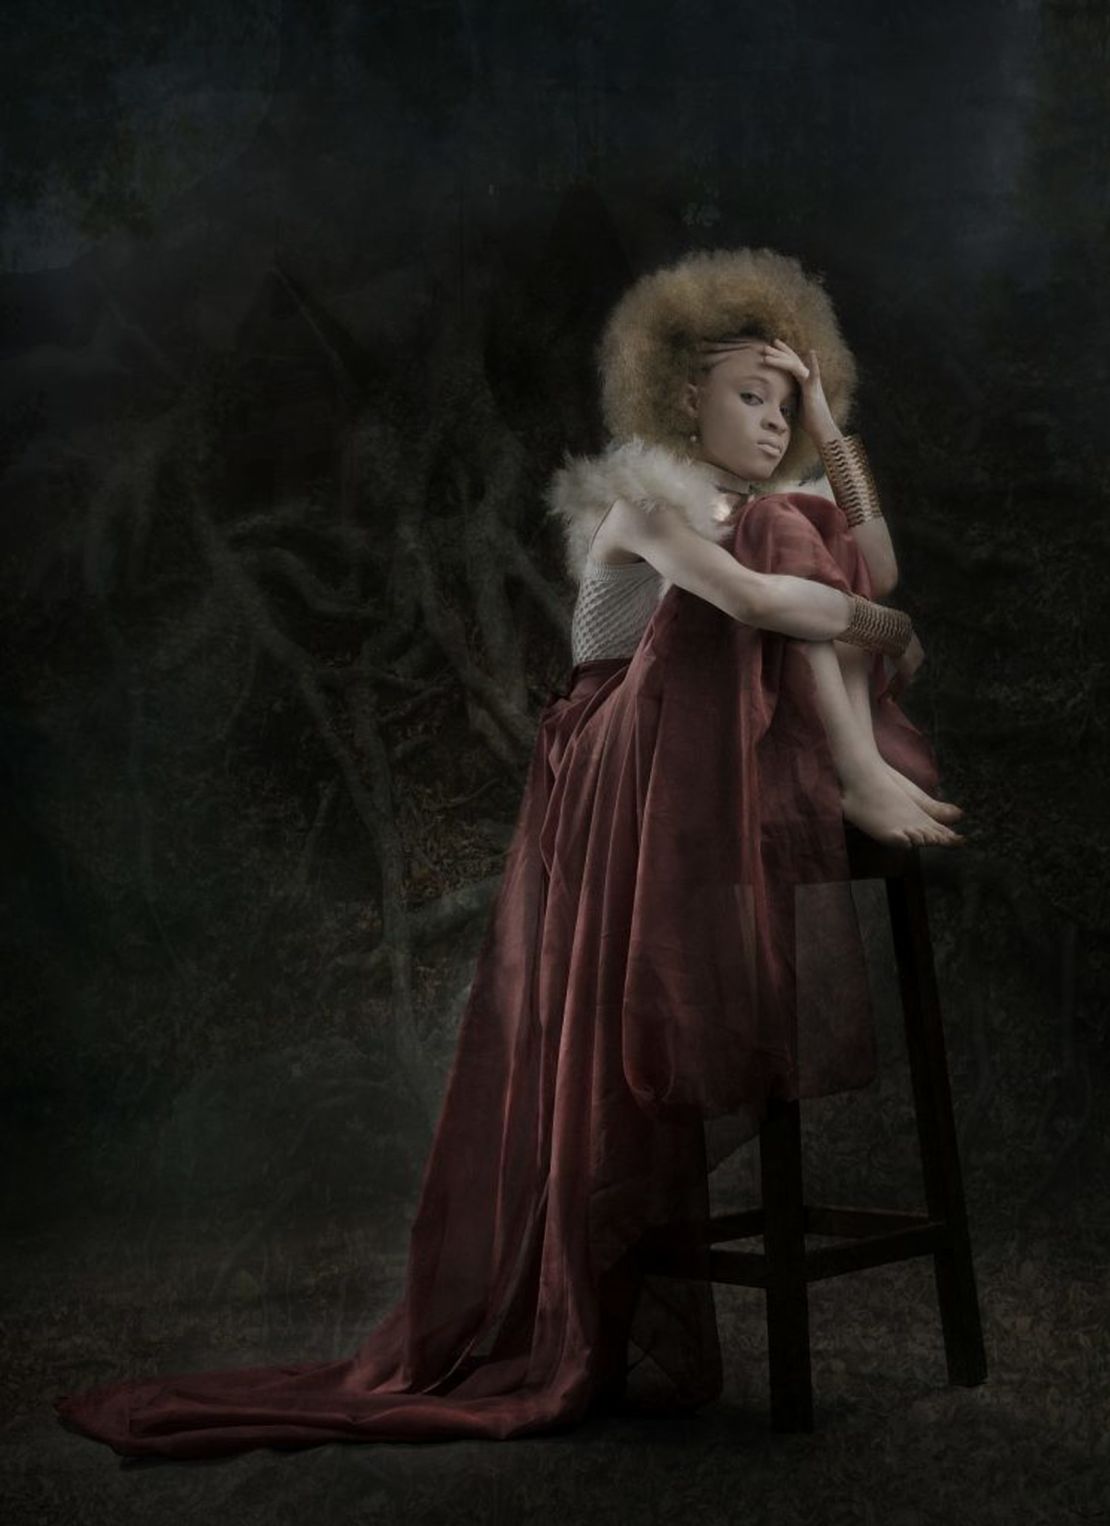 Efemena Ewhero is photographed in the dark here to depict how persons with albinism are often left wondering in the dark why people misjudge them based on their skin.